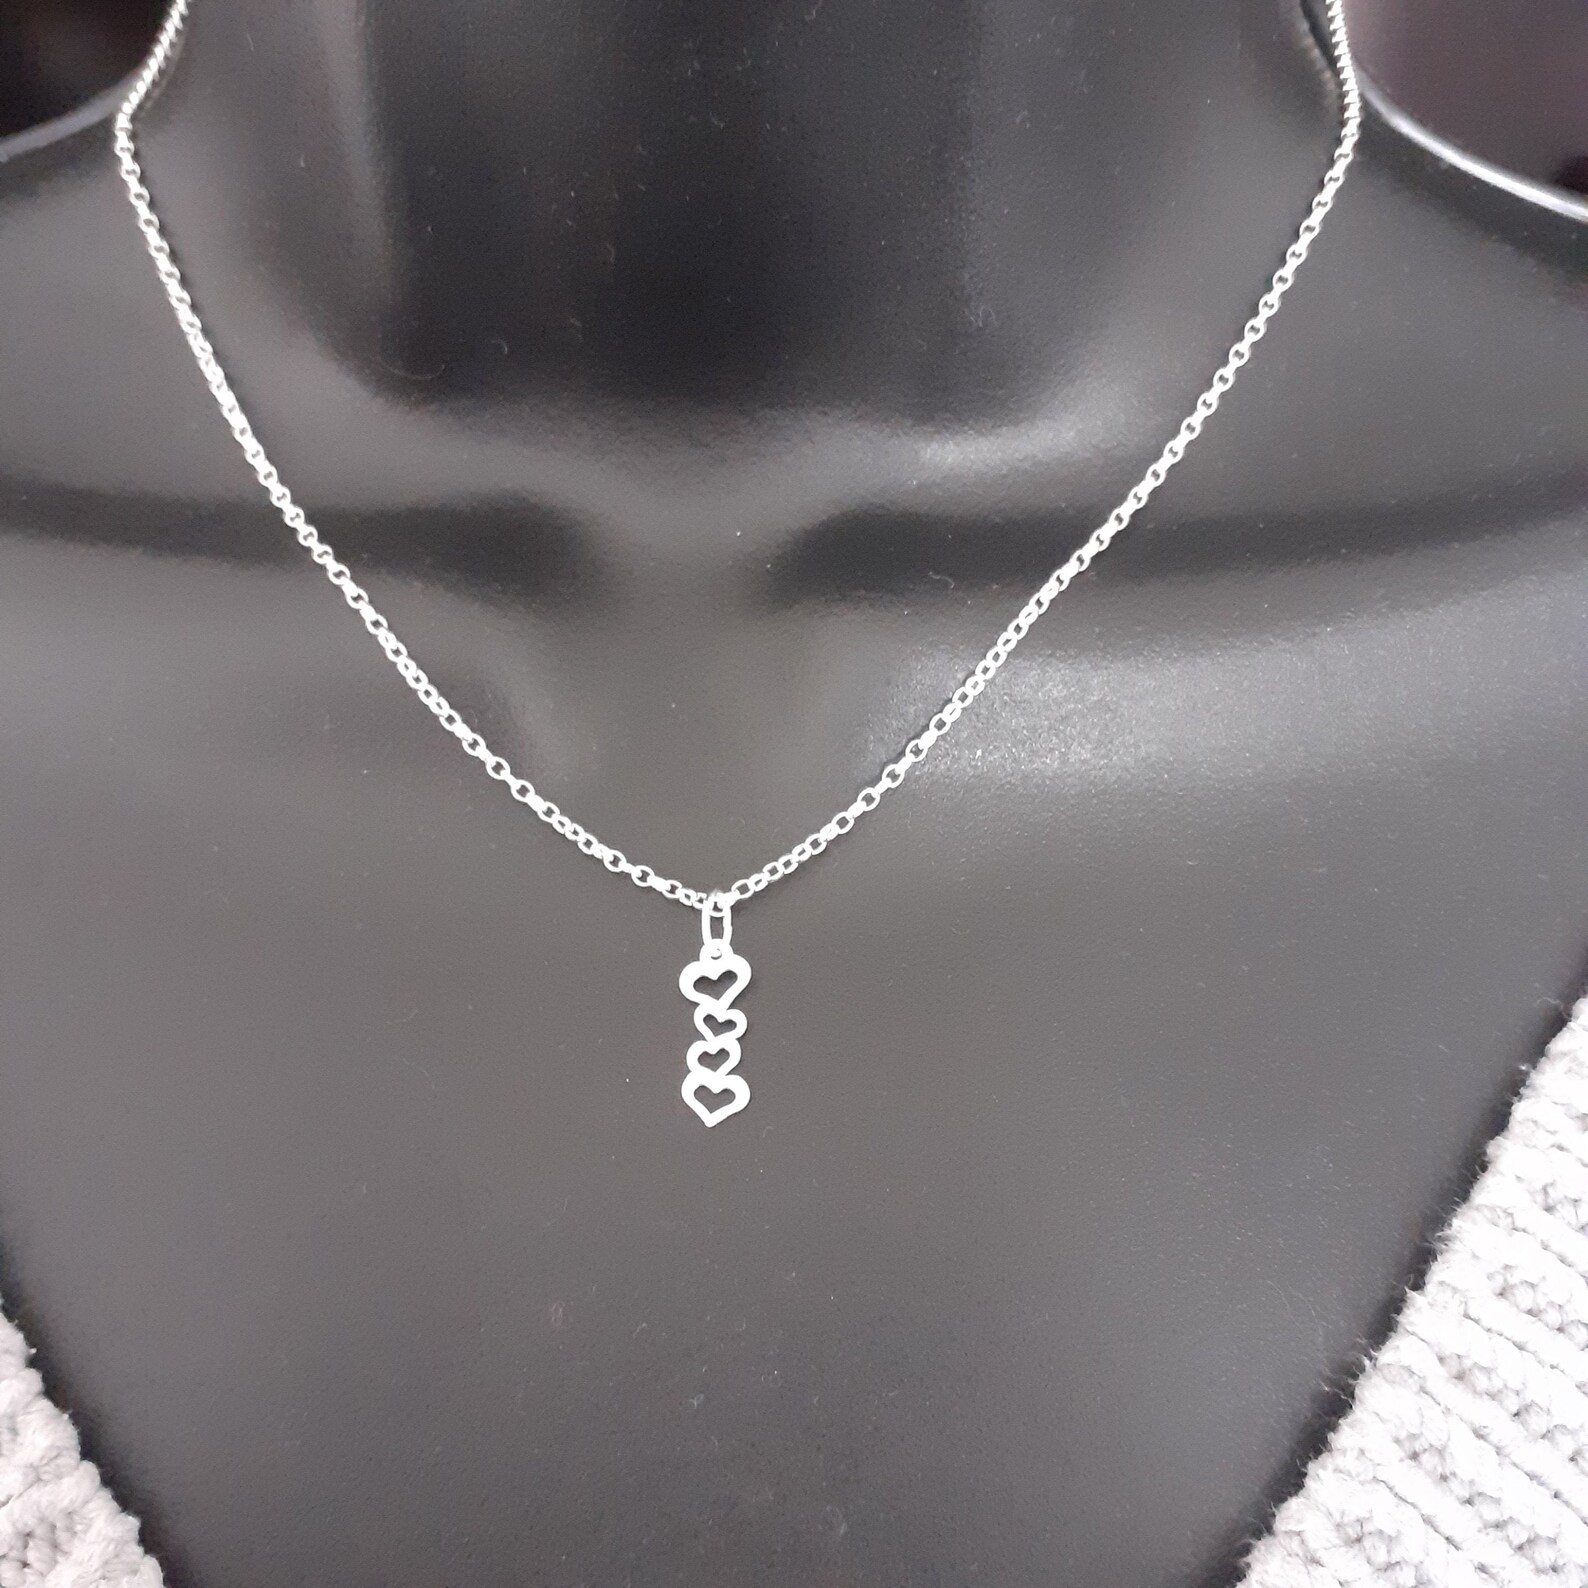 4 Hearts Necklace Sterling Silver | Etsy